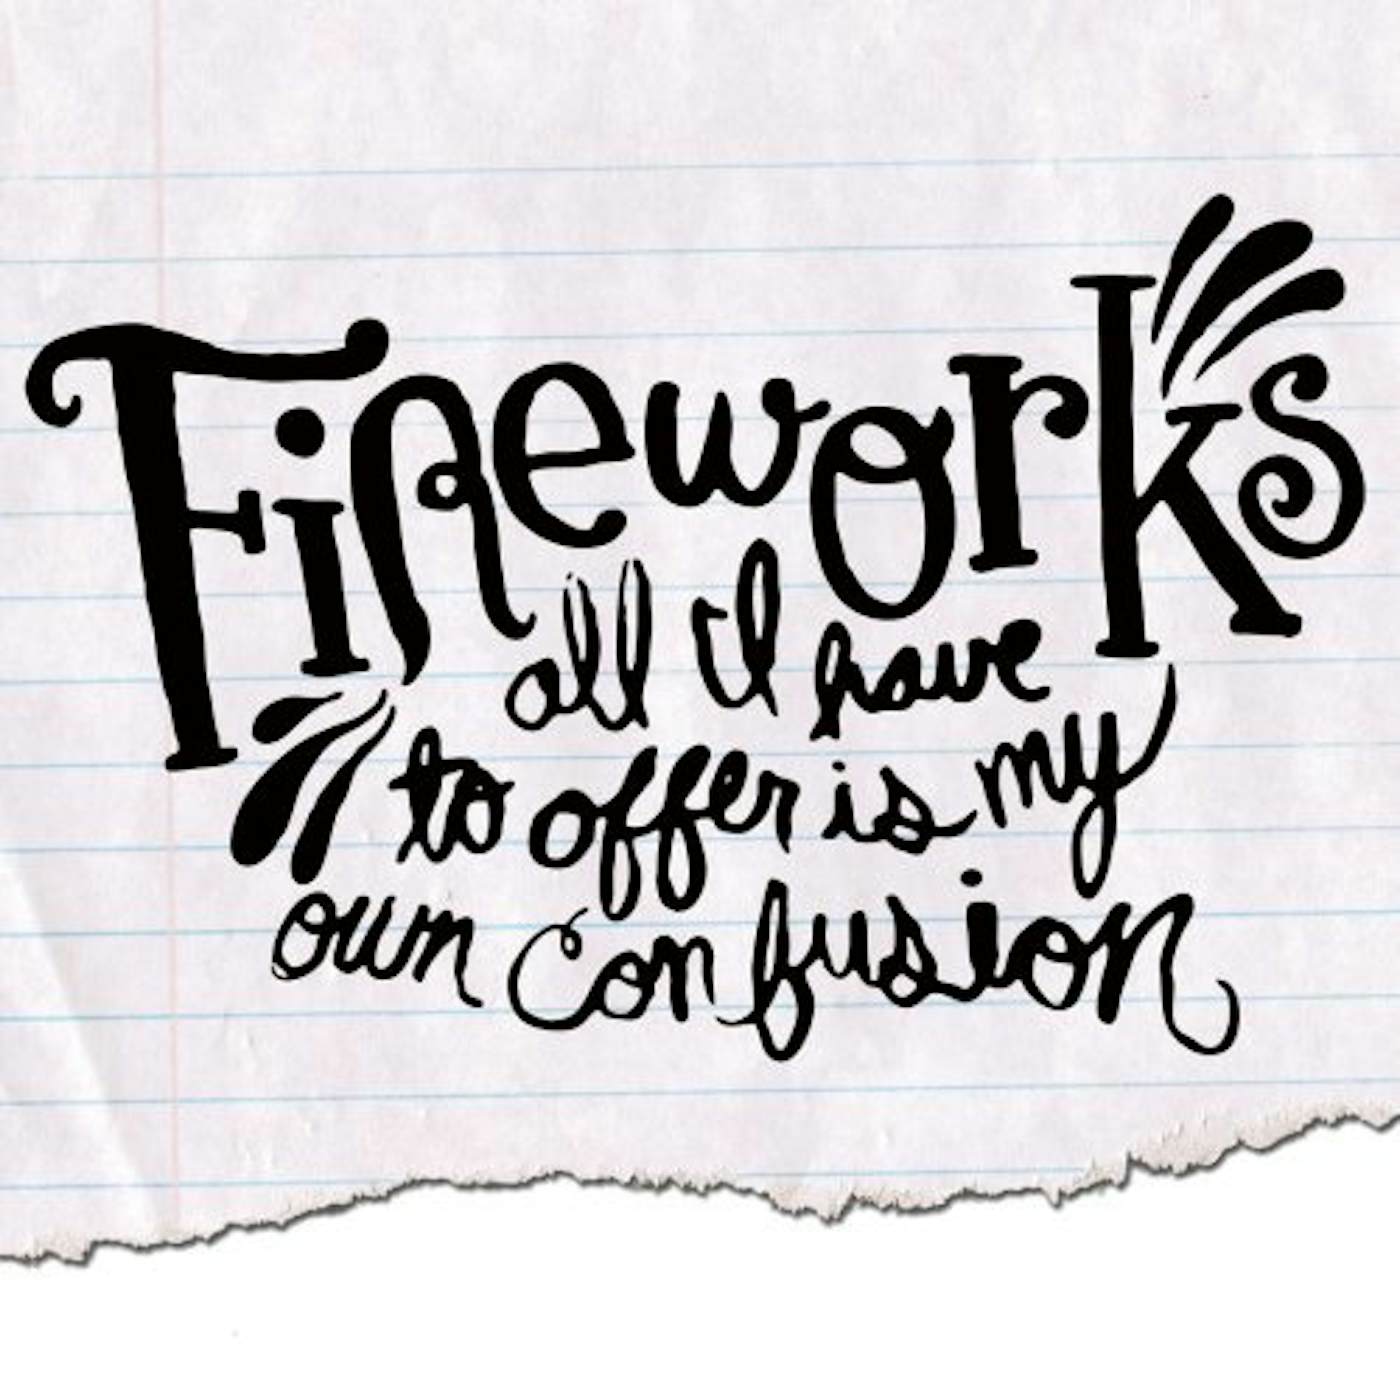 Fireworks ALL I HAVE TO OFFER IS MY OWN CONFUSION CD